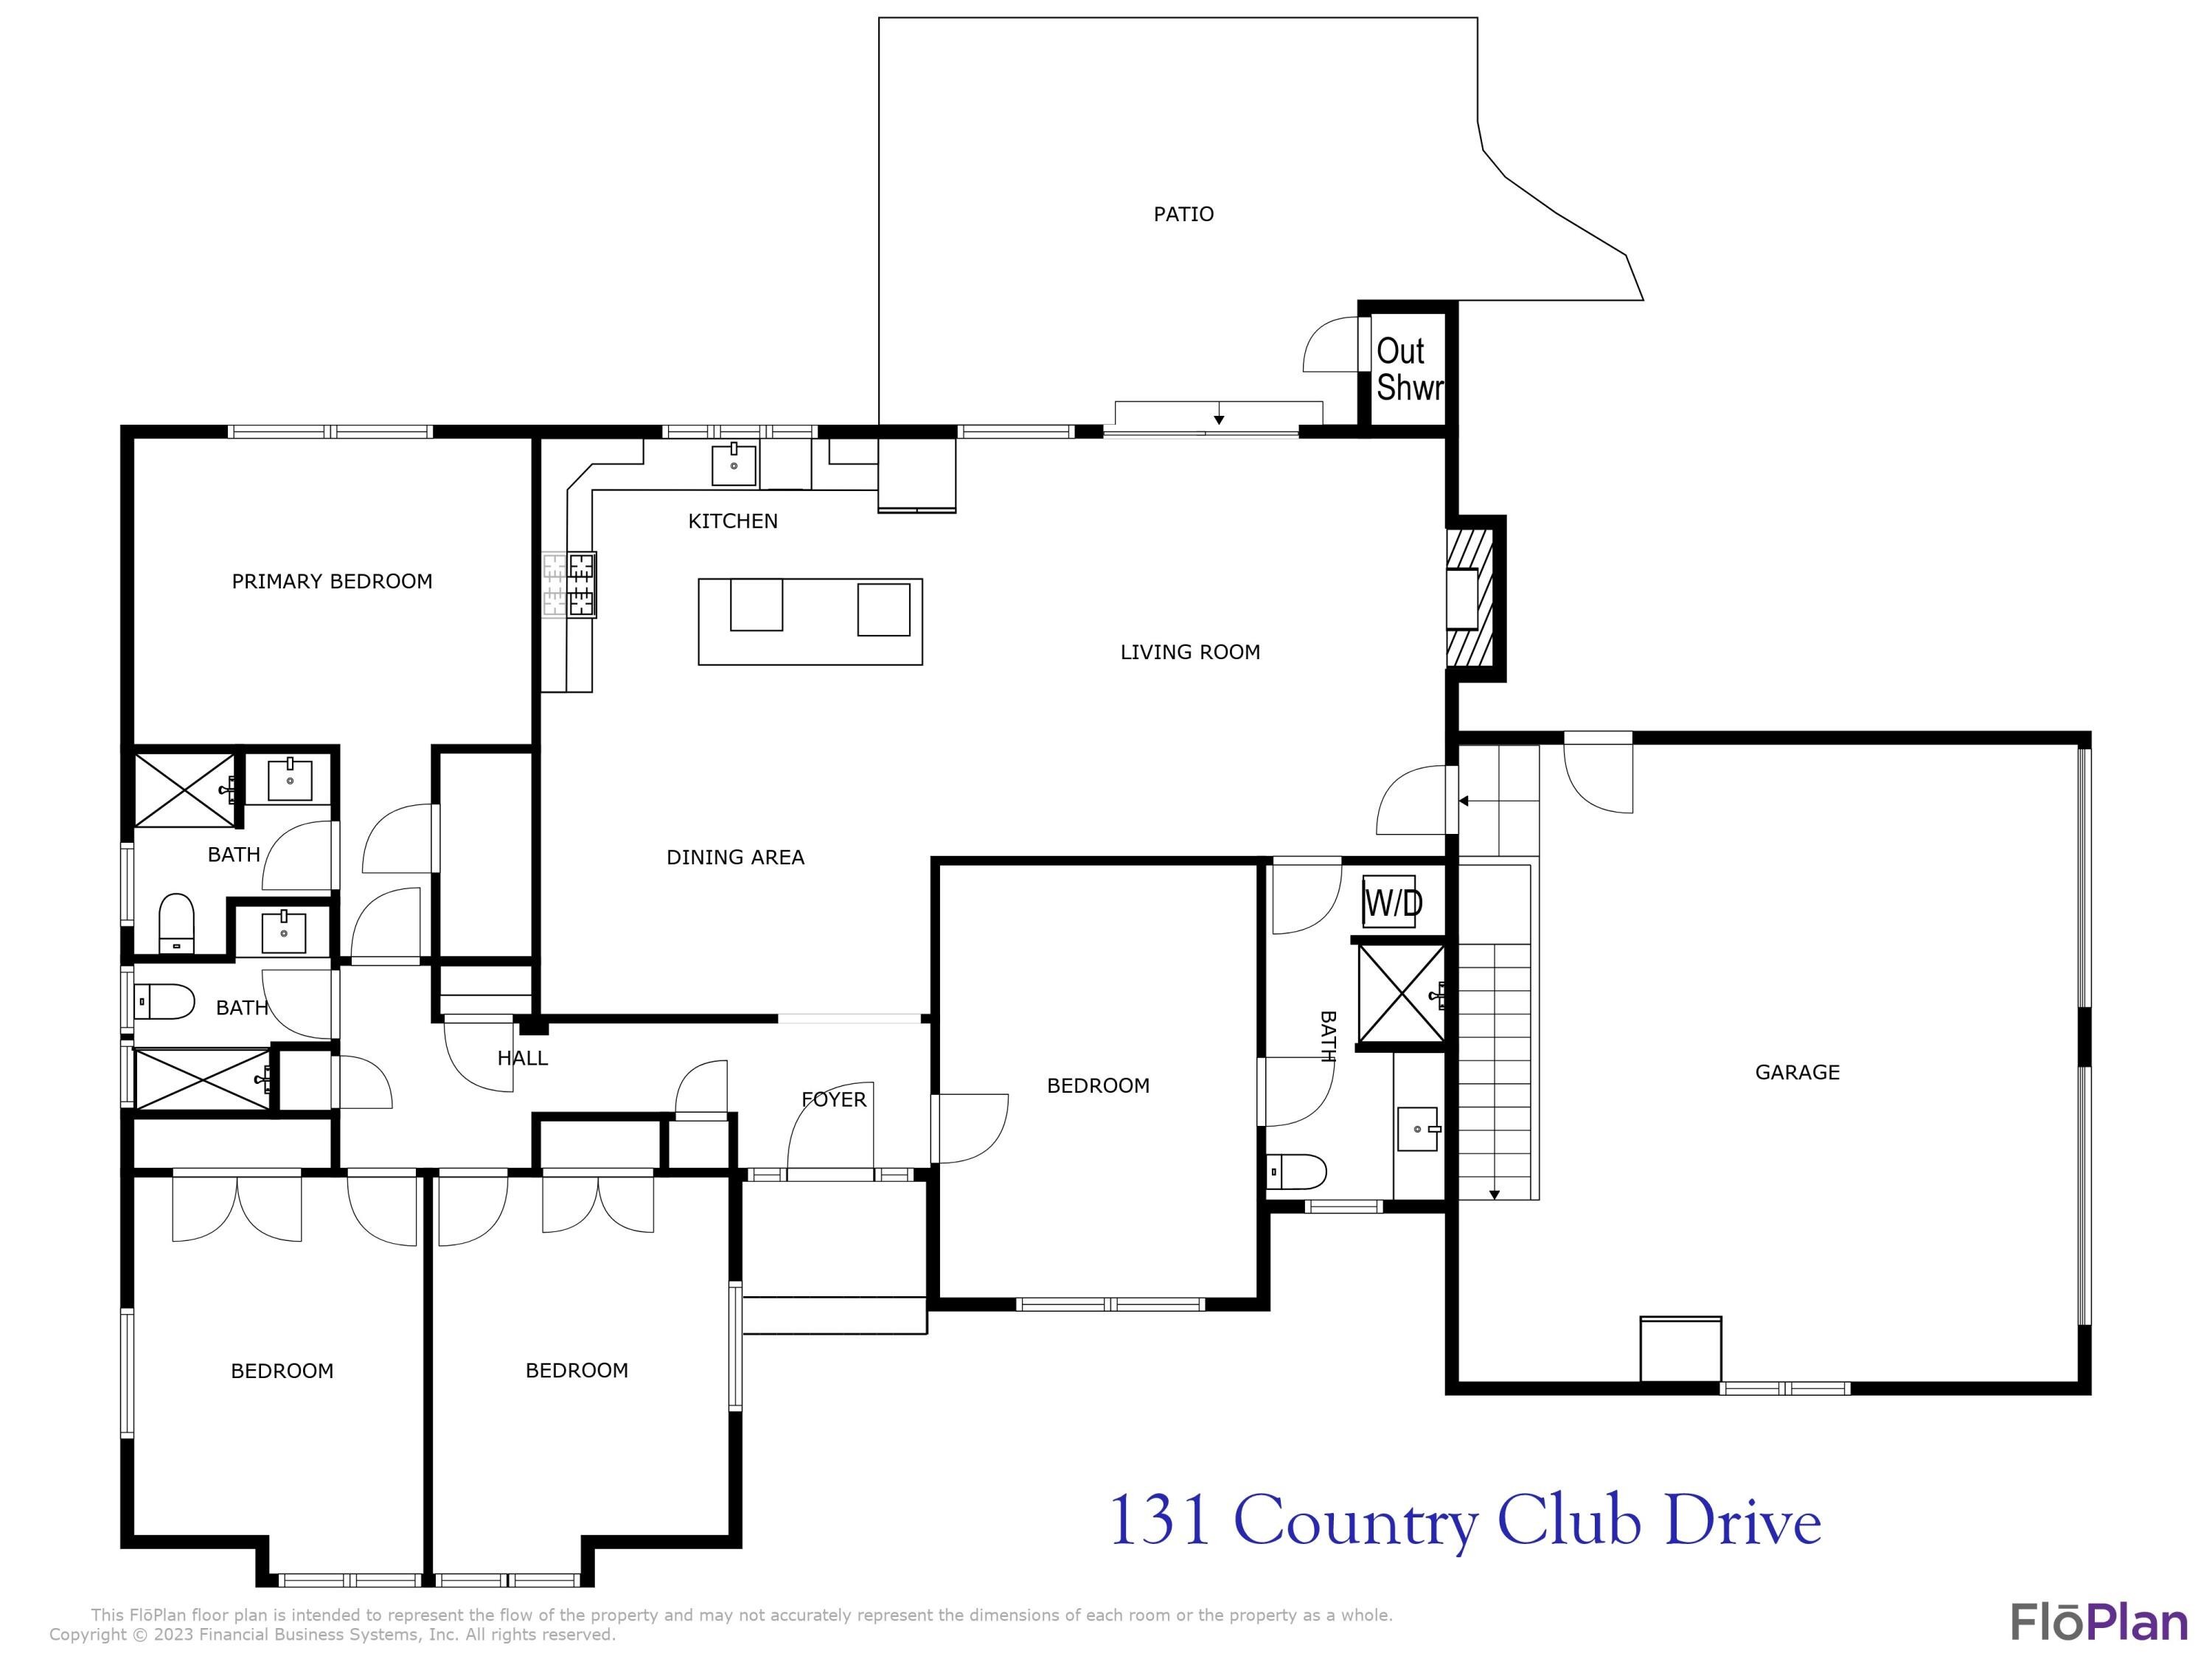 35. 131 Country Club Drive